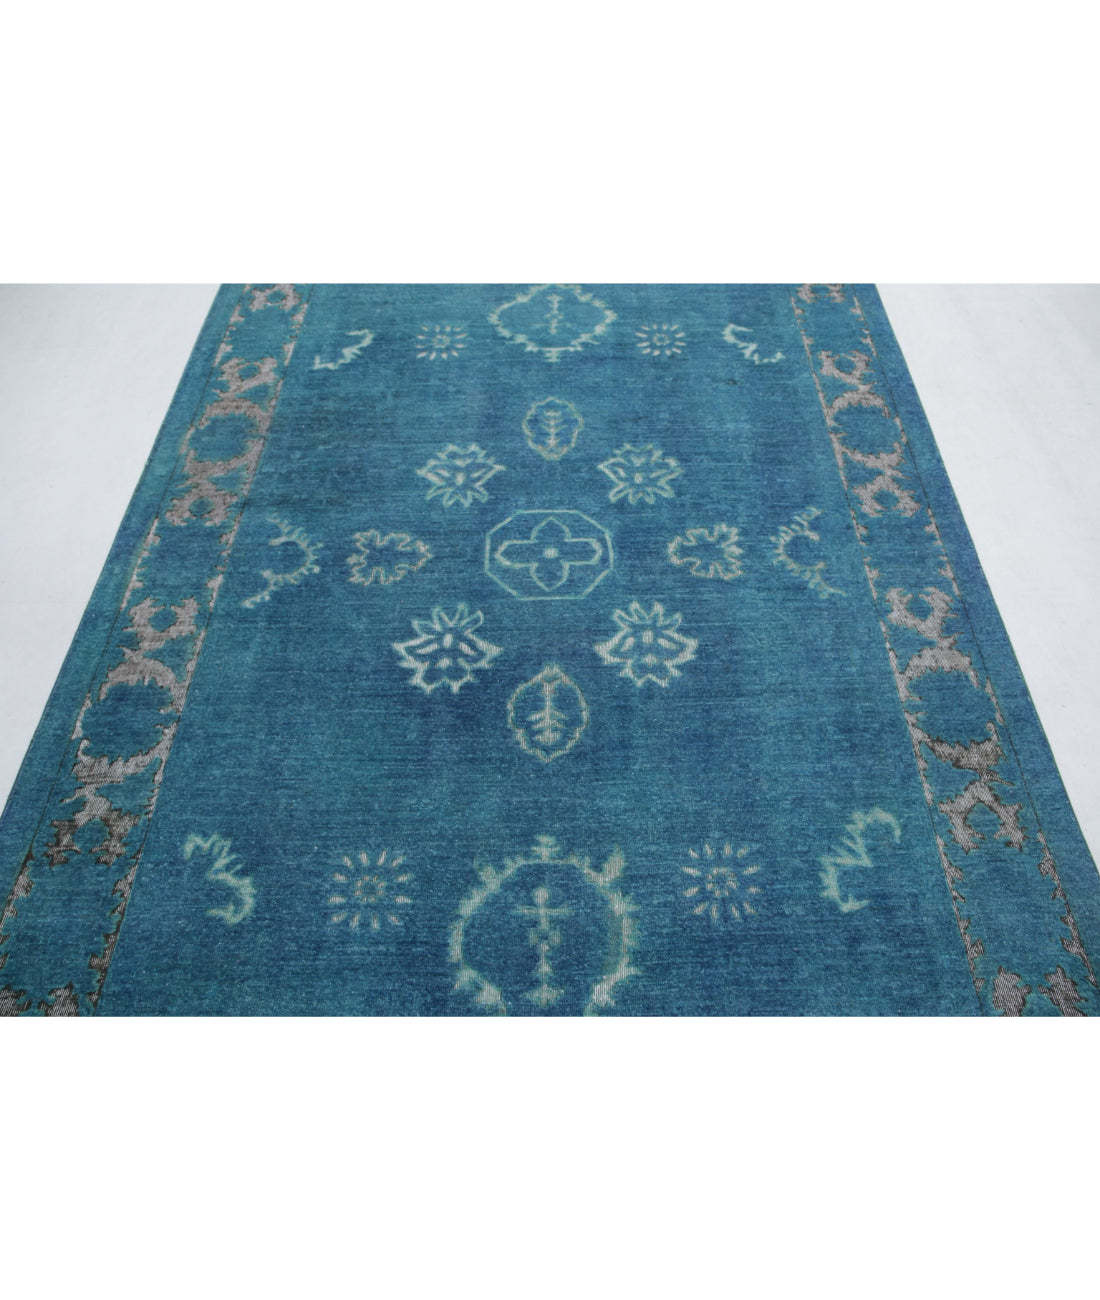 Hand Knotted Onyx Wool Rug - 5'11'' x 8'6'' 5'11'' x 8'6'' (178 X 255) / Blue / Blue